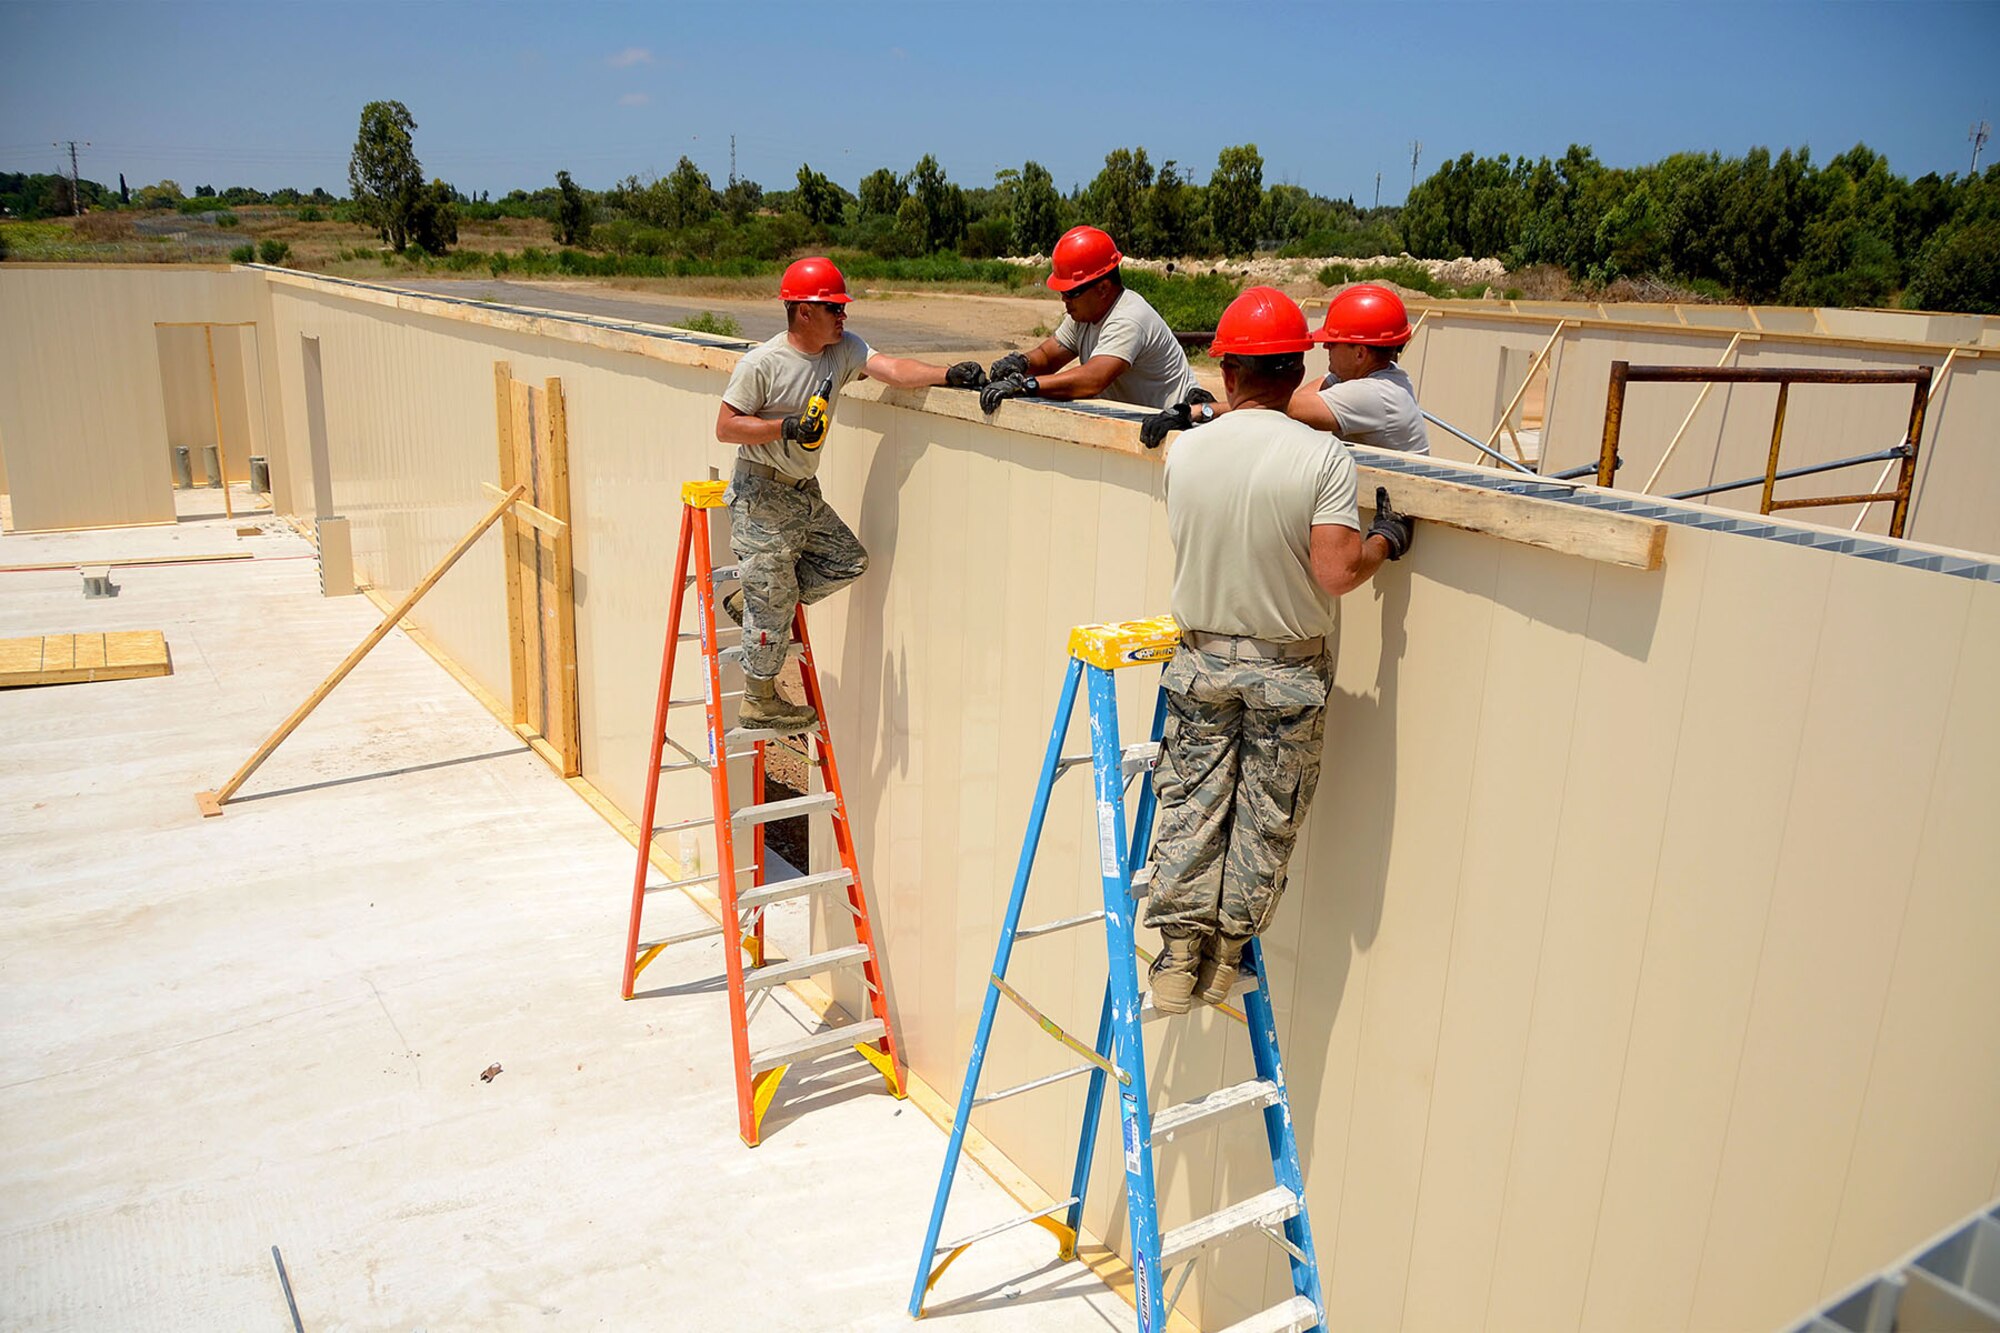 U.S. Airmen from the South Carolina Air National Guard’s 169th Civil Engineer Squadron at McEntire Joint National Guard Base, S.C., construct nuform walls for multi-purpose buildings in support of a Deployment for Training in Israel, July 8, 2015. The construction project is to help S.C. PRIME BEEF Airmen maintain their civil engineering specialties. Swamp Fox civil engineers are working alongside 200th RED HORSE Squadron and U.S. Navy SEABEES civil engineers during the training exercise. (South Carolina Air National Guard photo by Tech. Sgt. Caycee R. Watson / RELEASED)